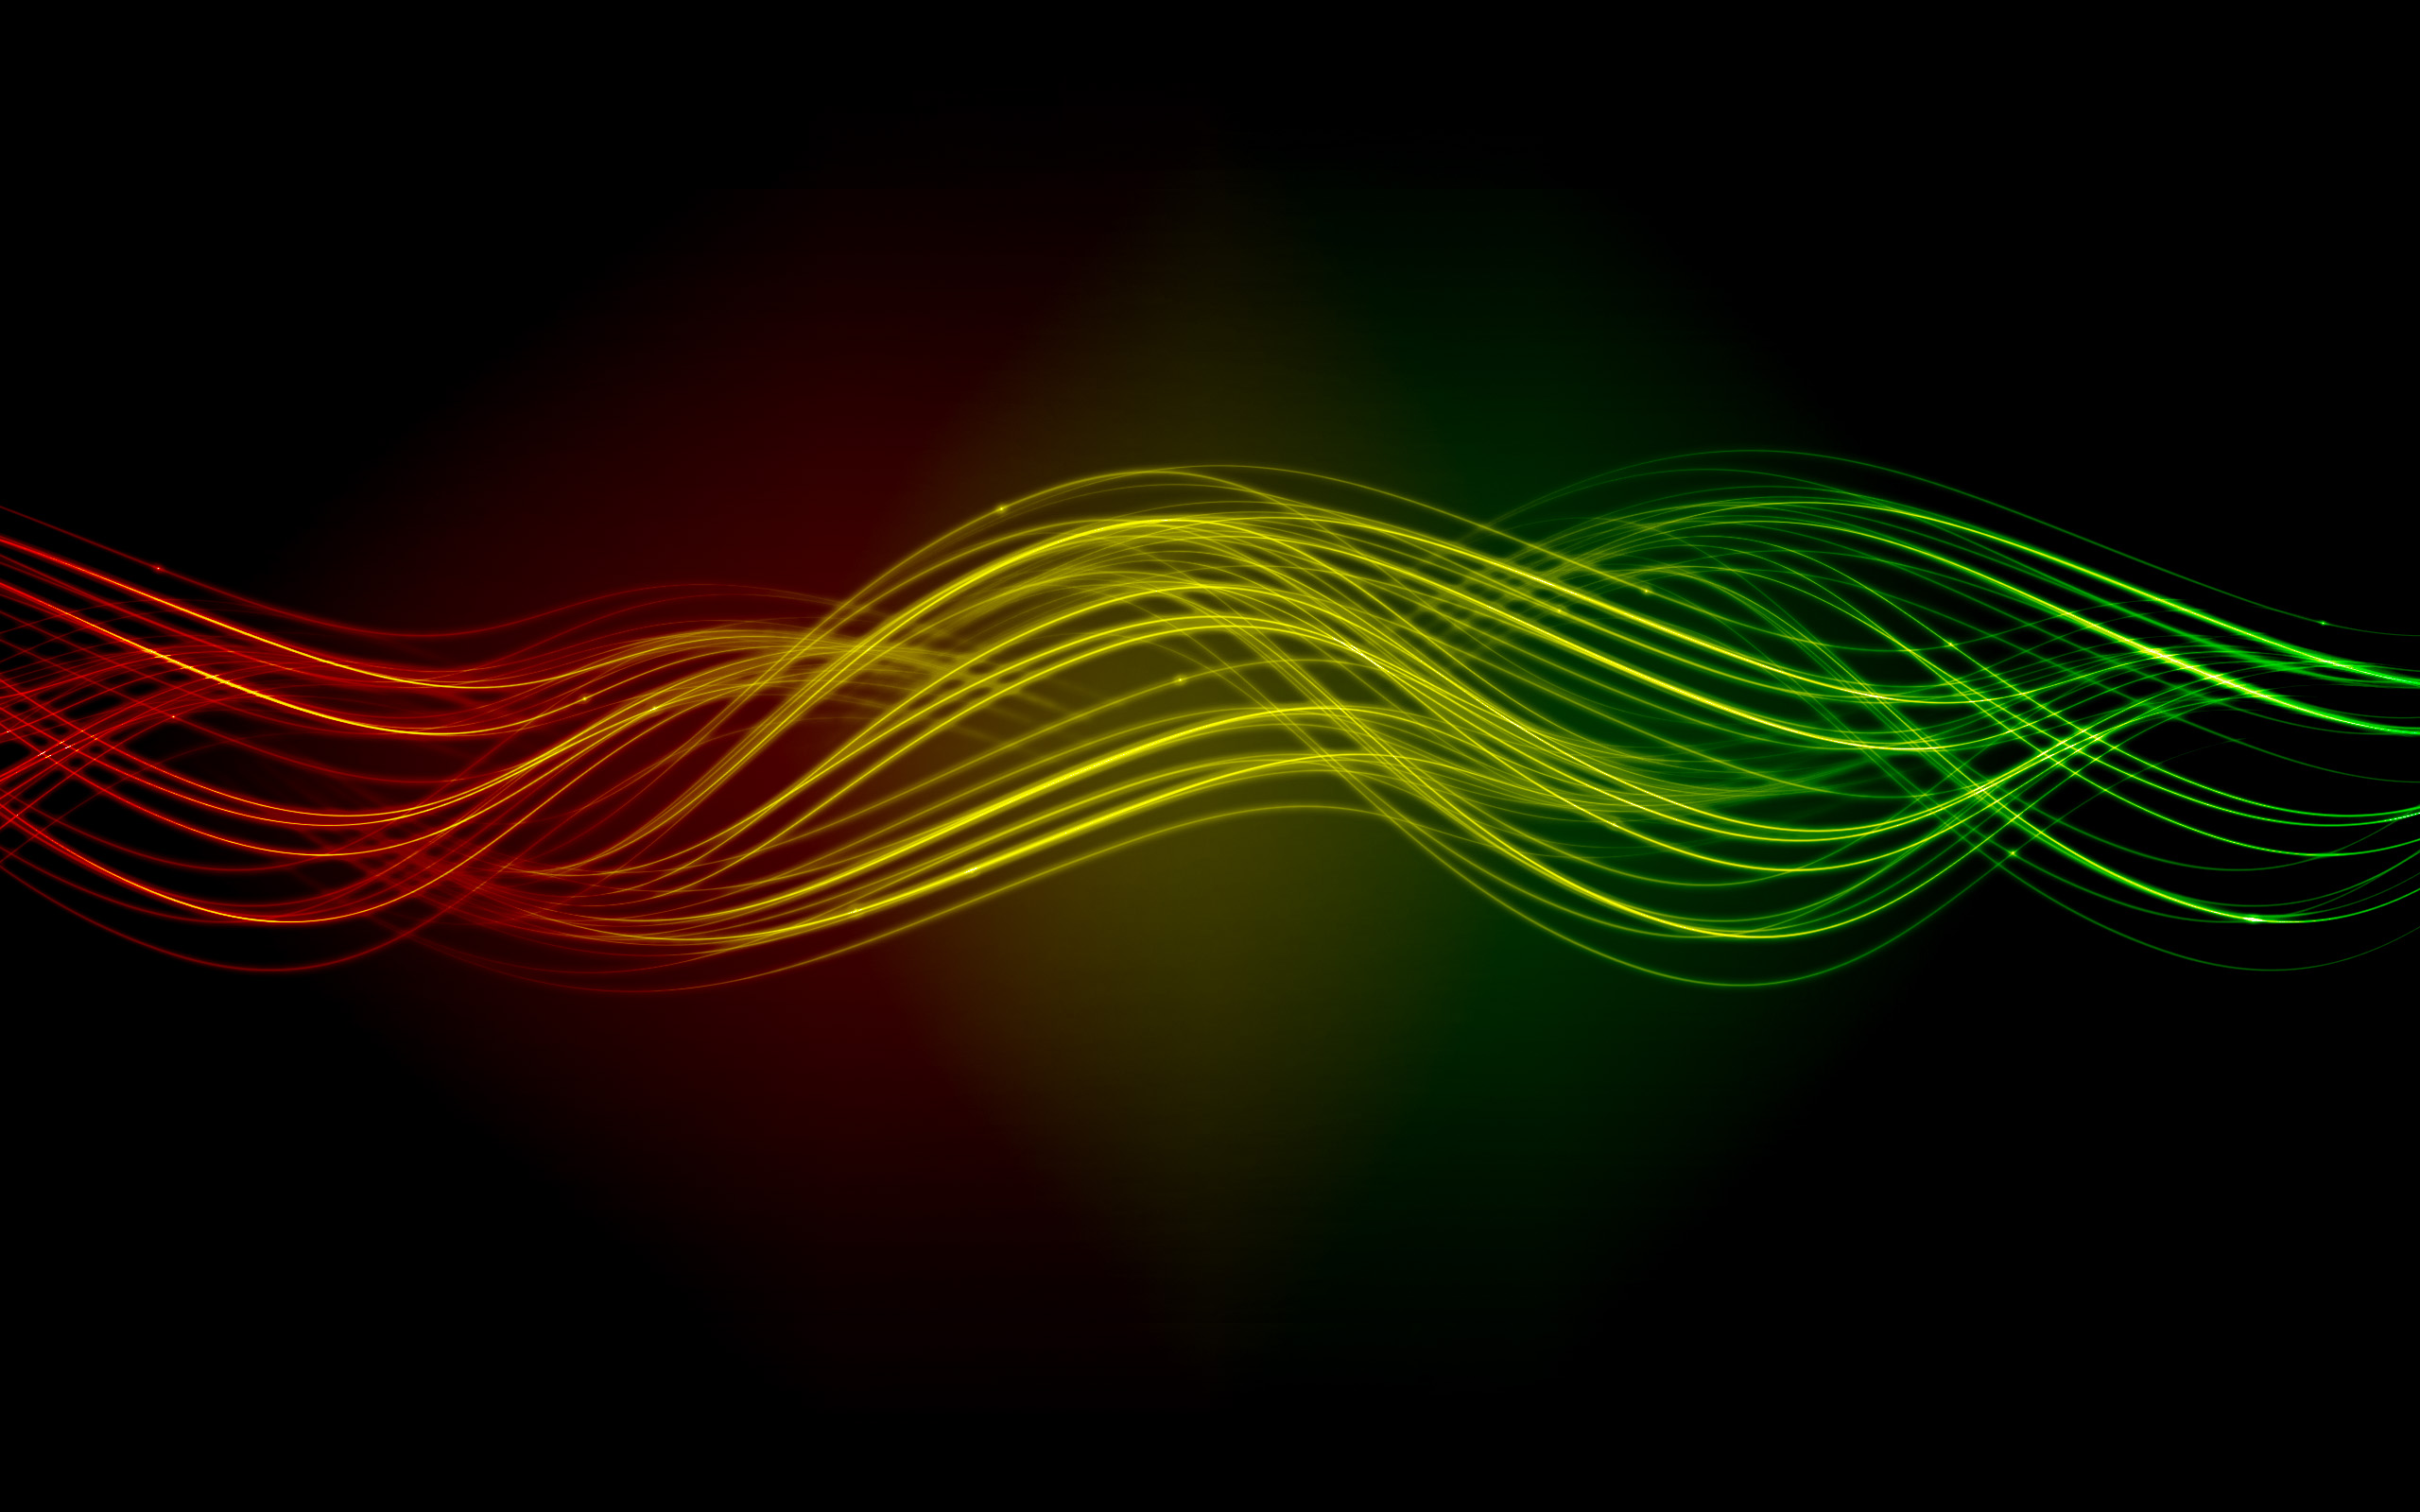 green, abstract, red, multicolor, yellow, waves, digital art, lines, simple background, black background wallpaper